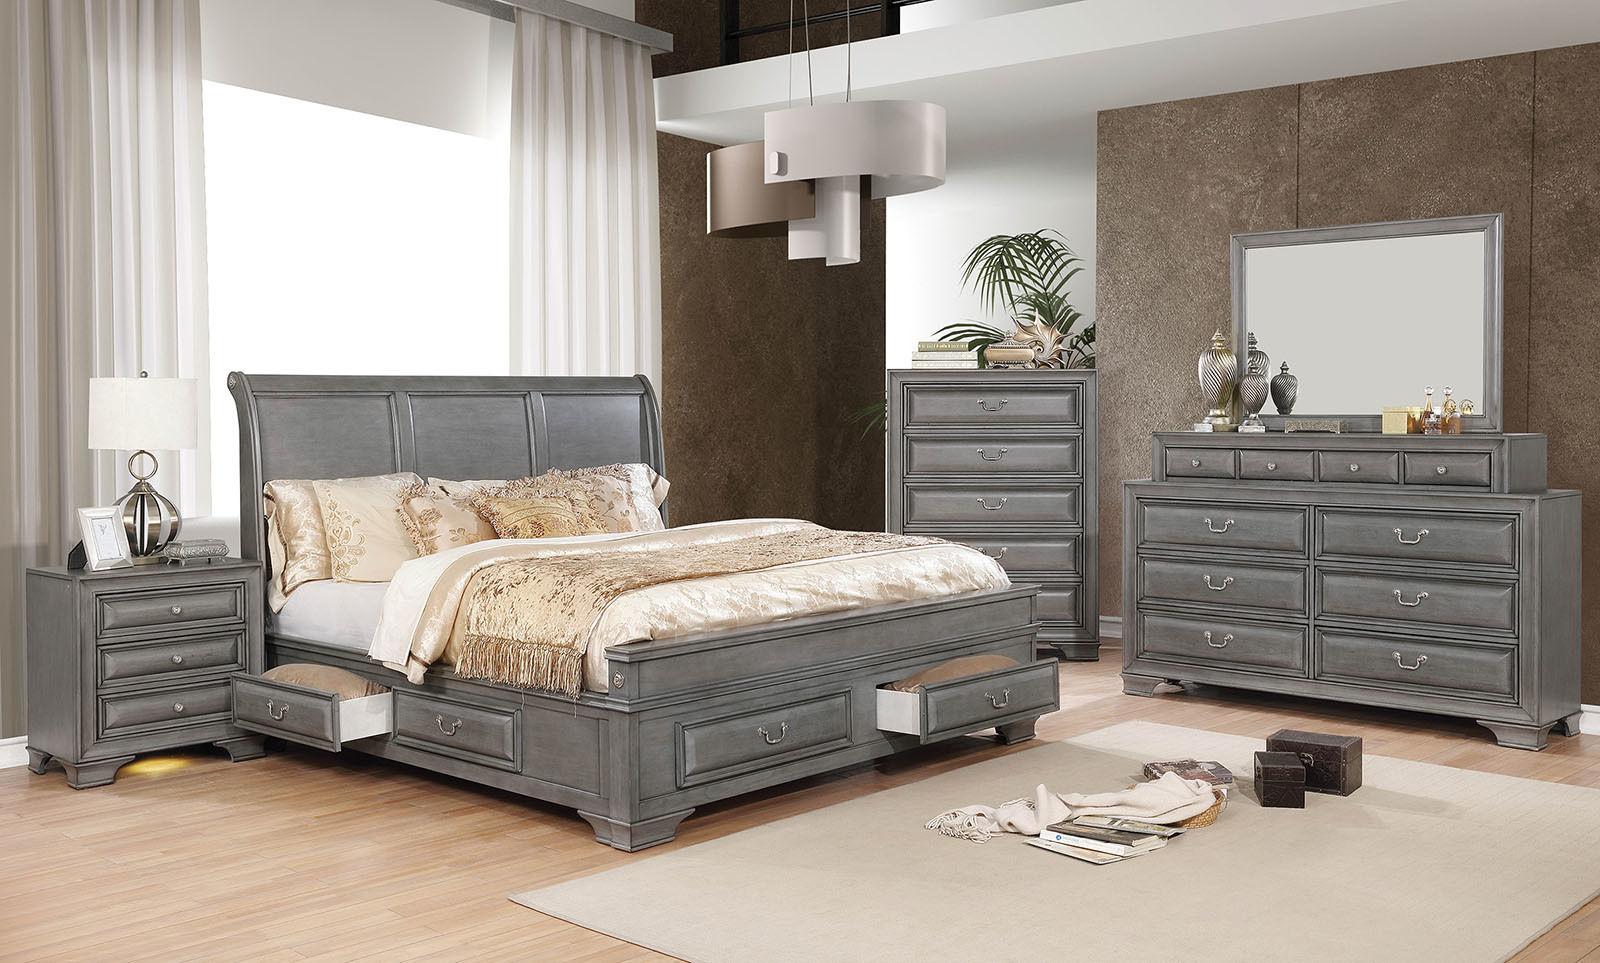 Transitional Storage Bedroom Set CM7302GY-CK-6PC Brandt CM7302GY-CK-6PC in Gray 